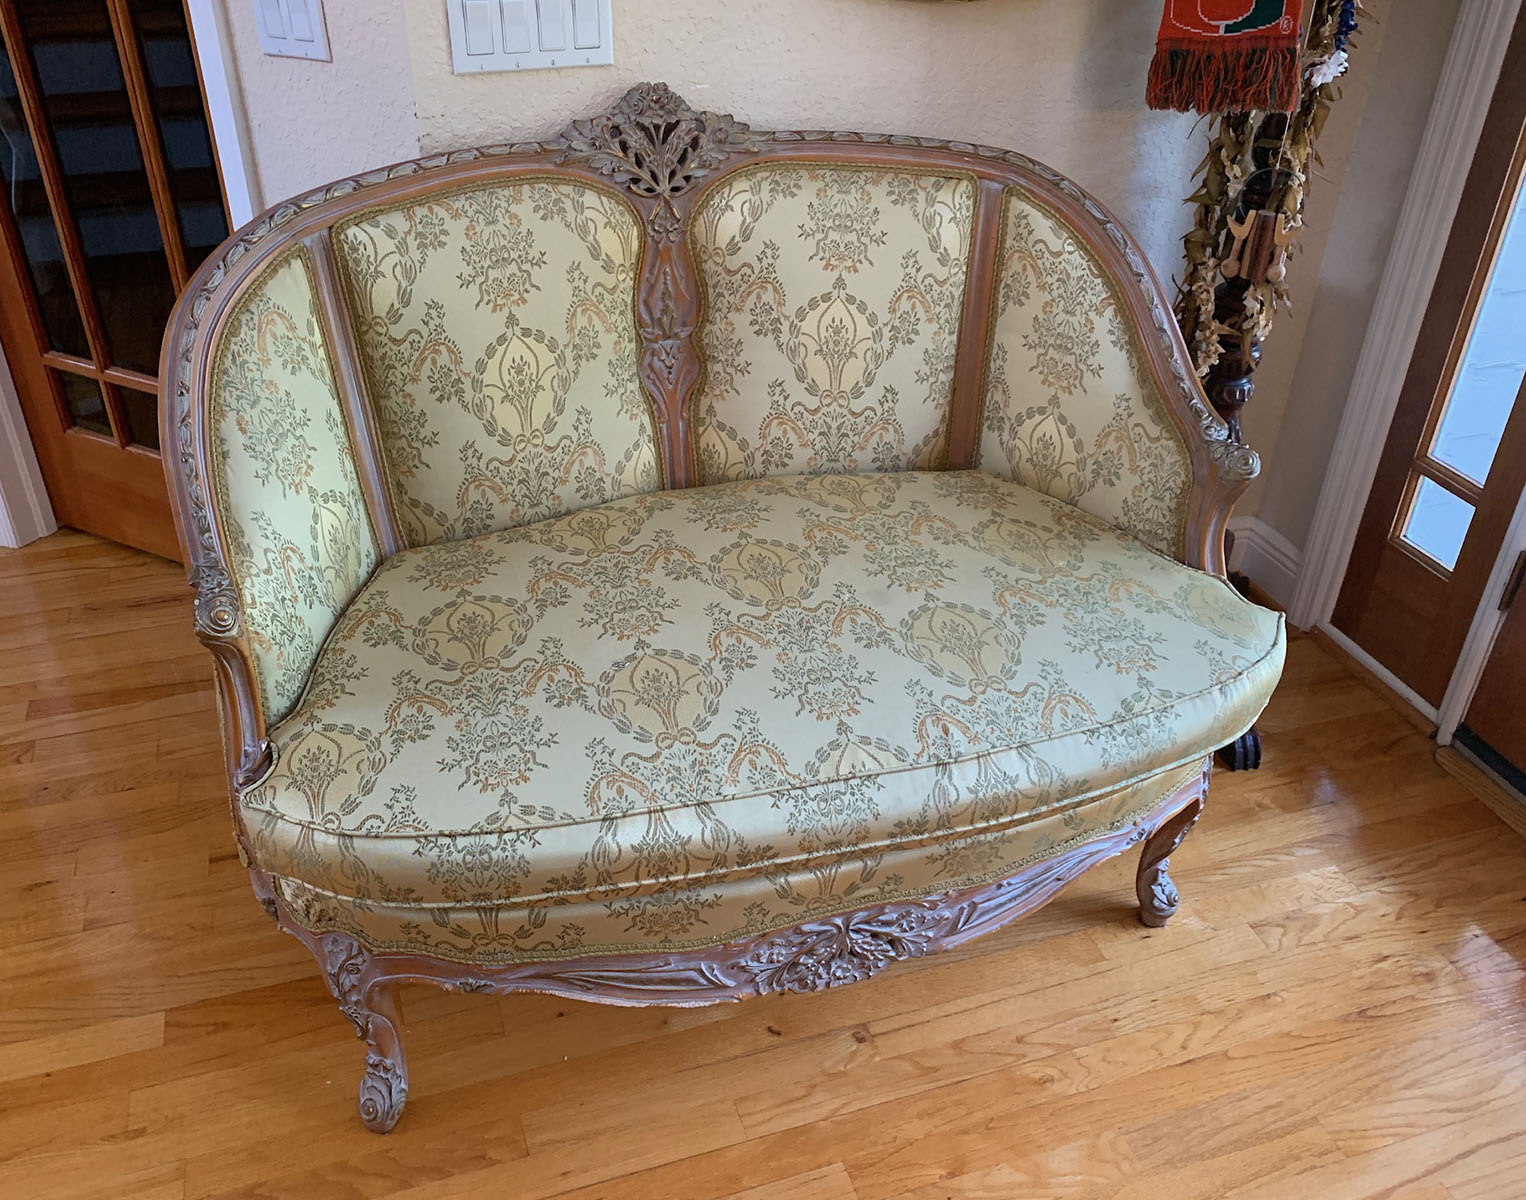 FRENCH CARVED SETTEE: Carved French